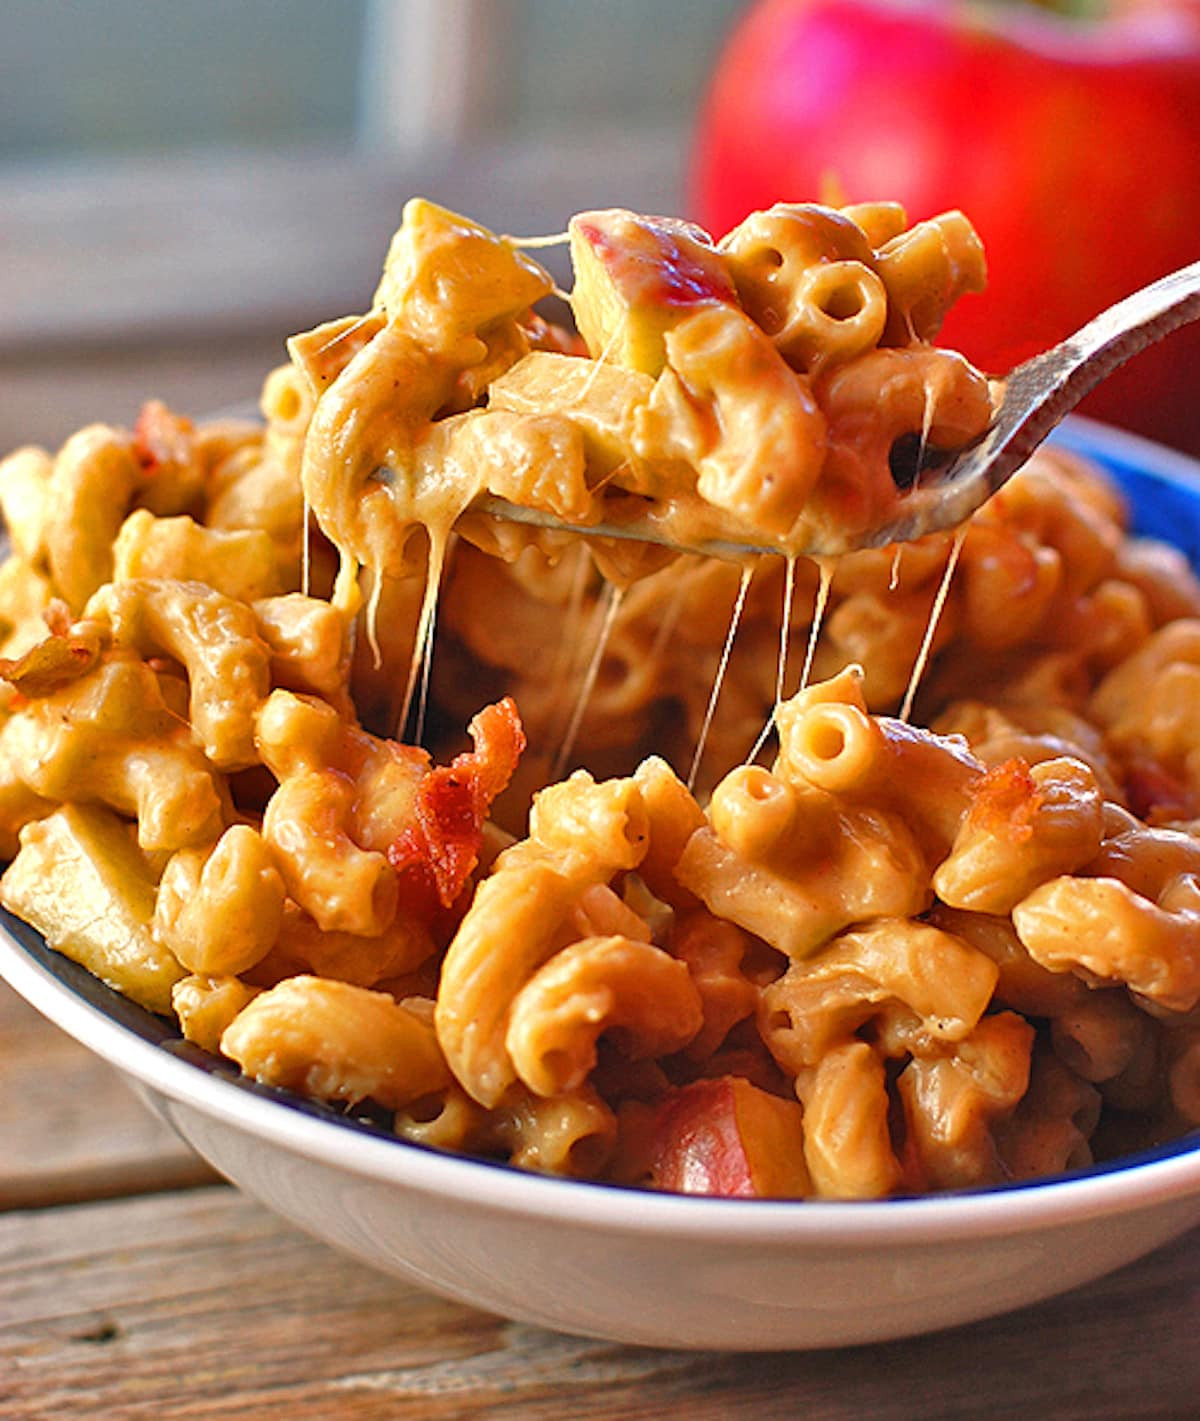 Mac And Cheese Recipes With Bacon
 Butternut Squash Mac and Cheese with Caramelized ions